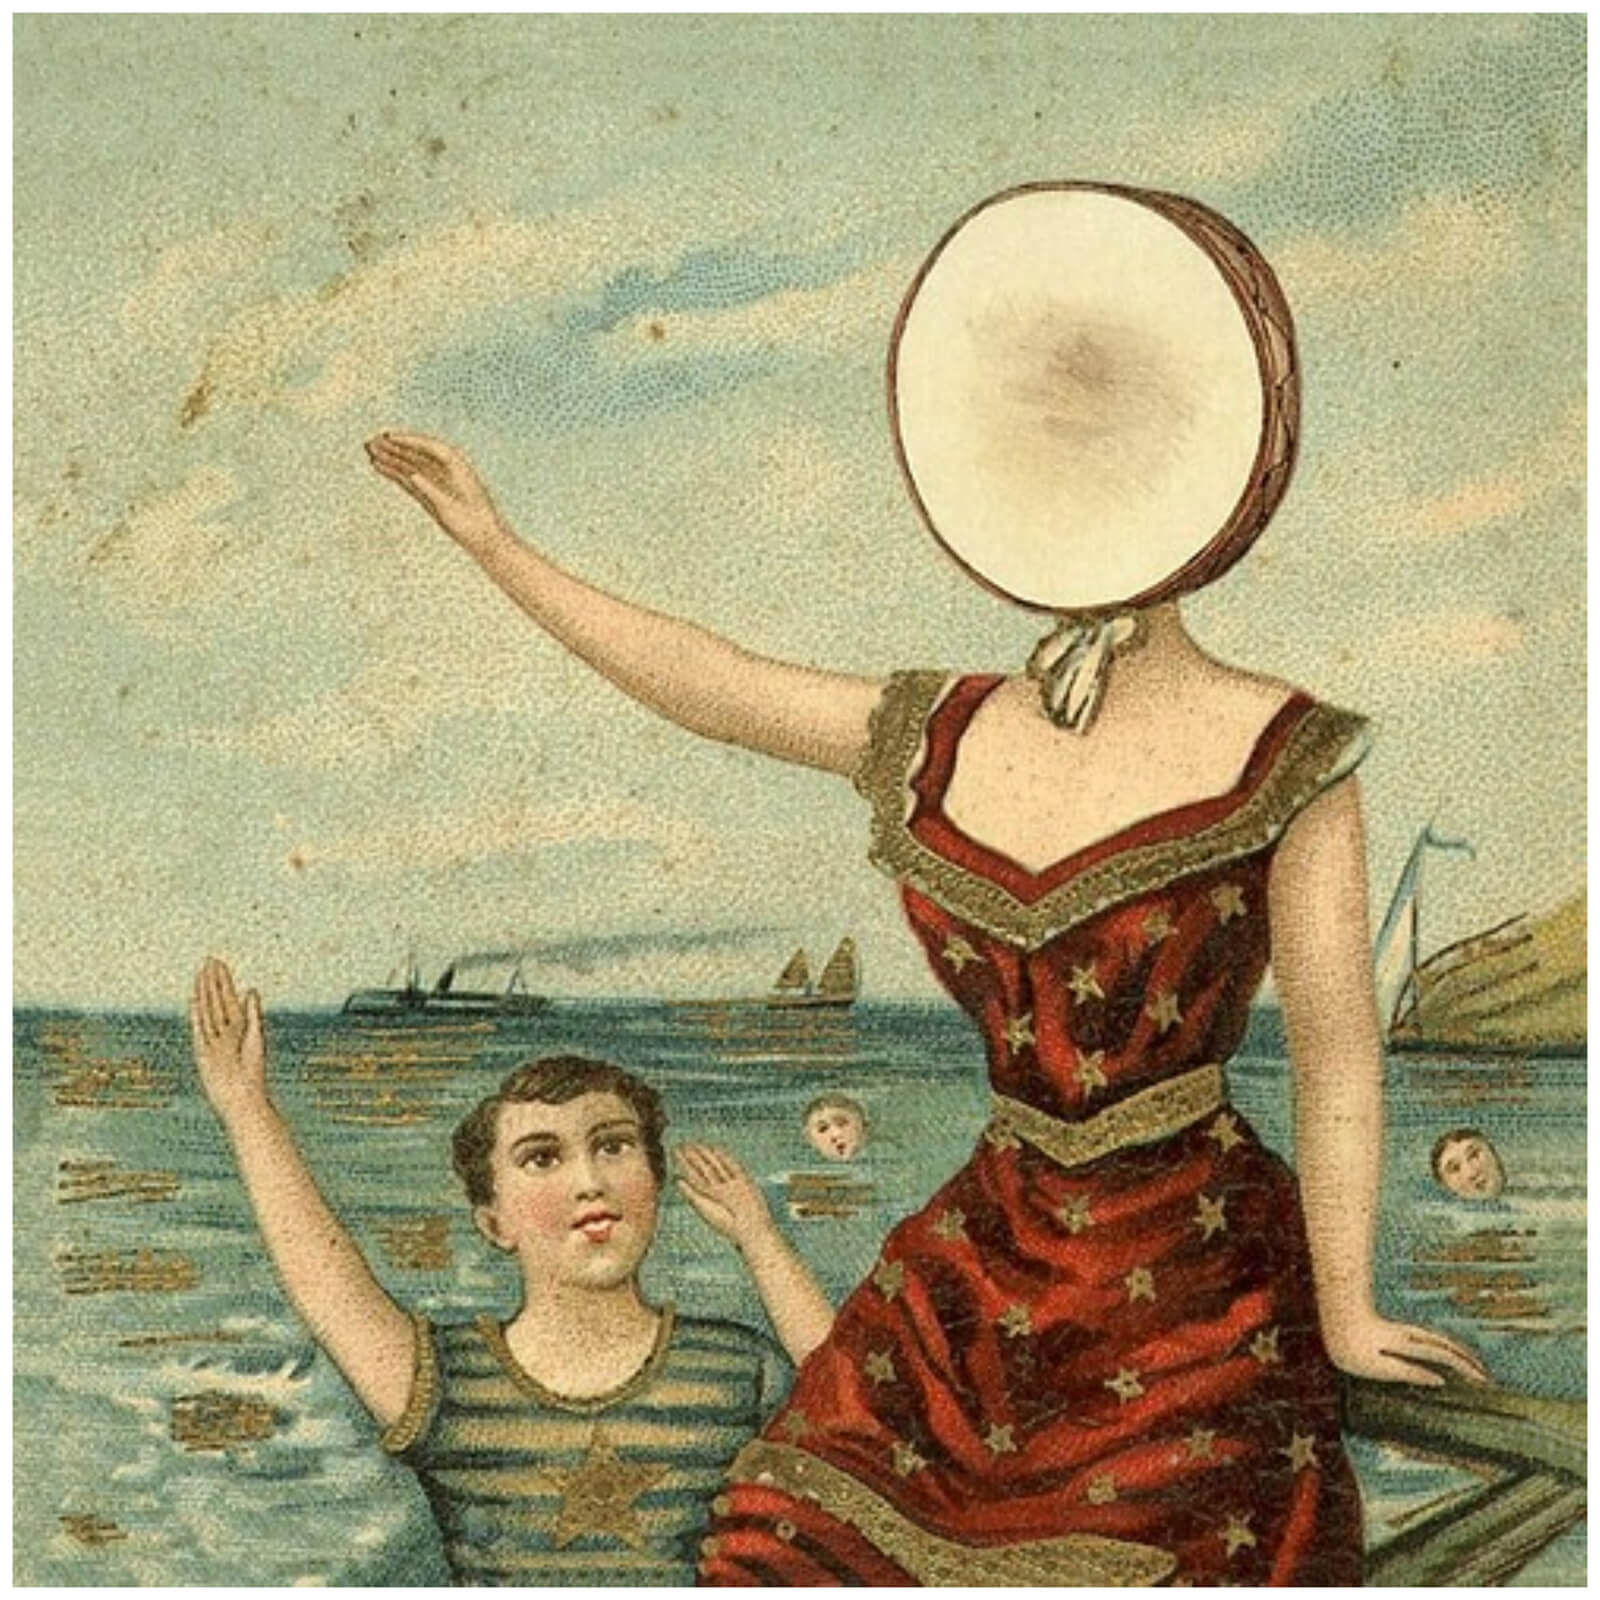 Neutral Milk Hotel - In The Aeroplane Over The Sea 180g LP